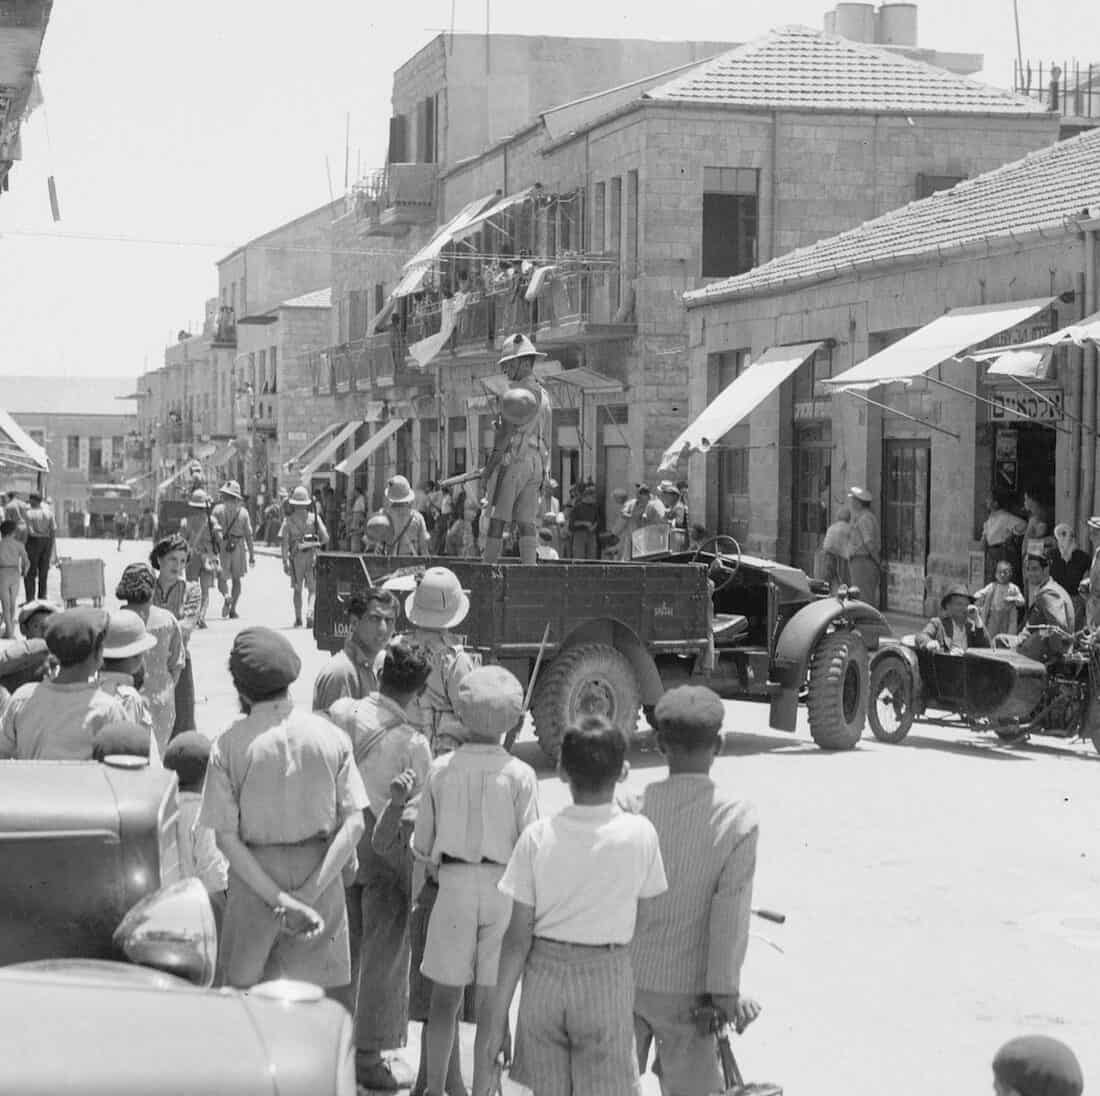 British army and police raid in the Machane Yehuda Market sometime between 1934 and 1939. Photo courtesy of the G. Eric and Edith Matson Photograph Collection, US Library of Congress